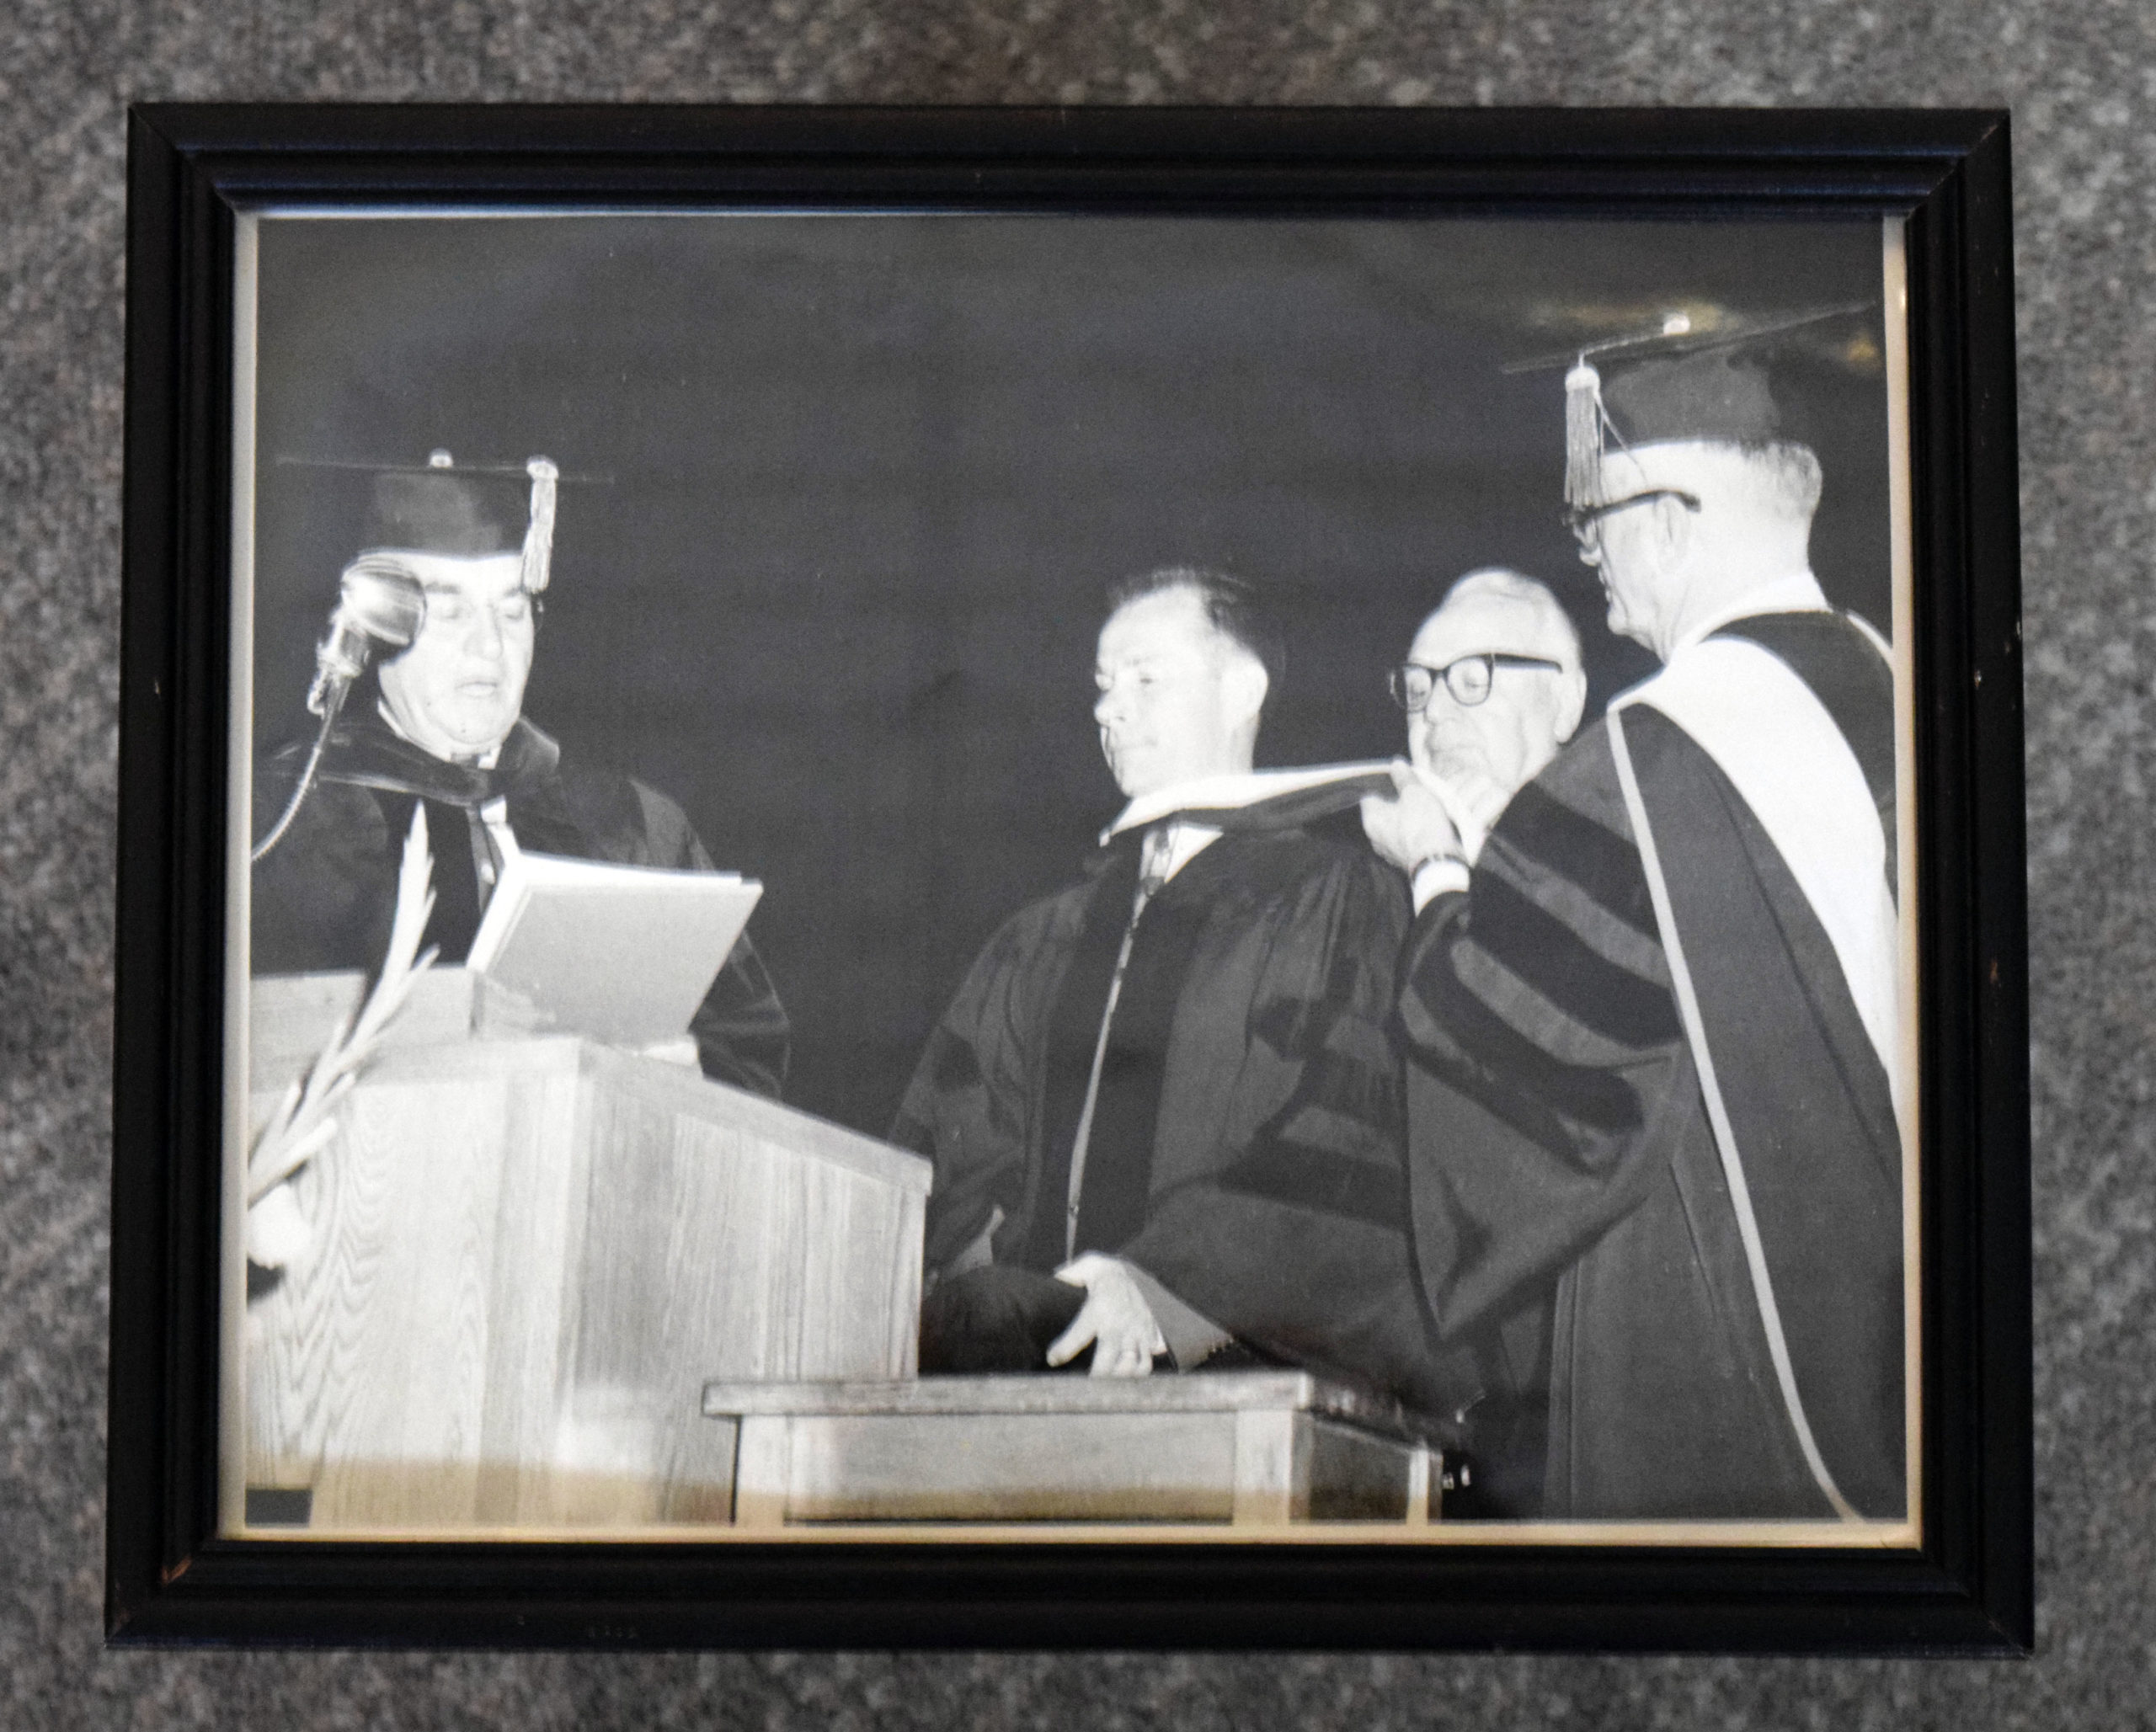 Fennell receiving honorary doctorate from OCU (1957)